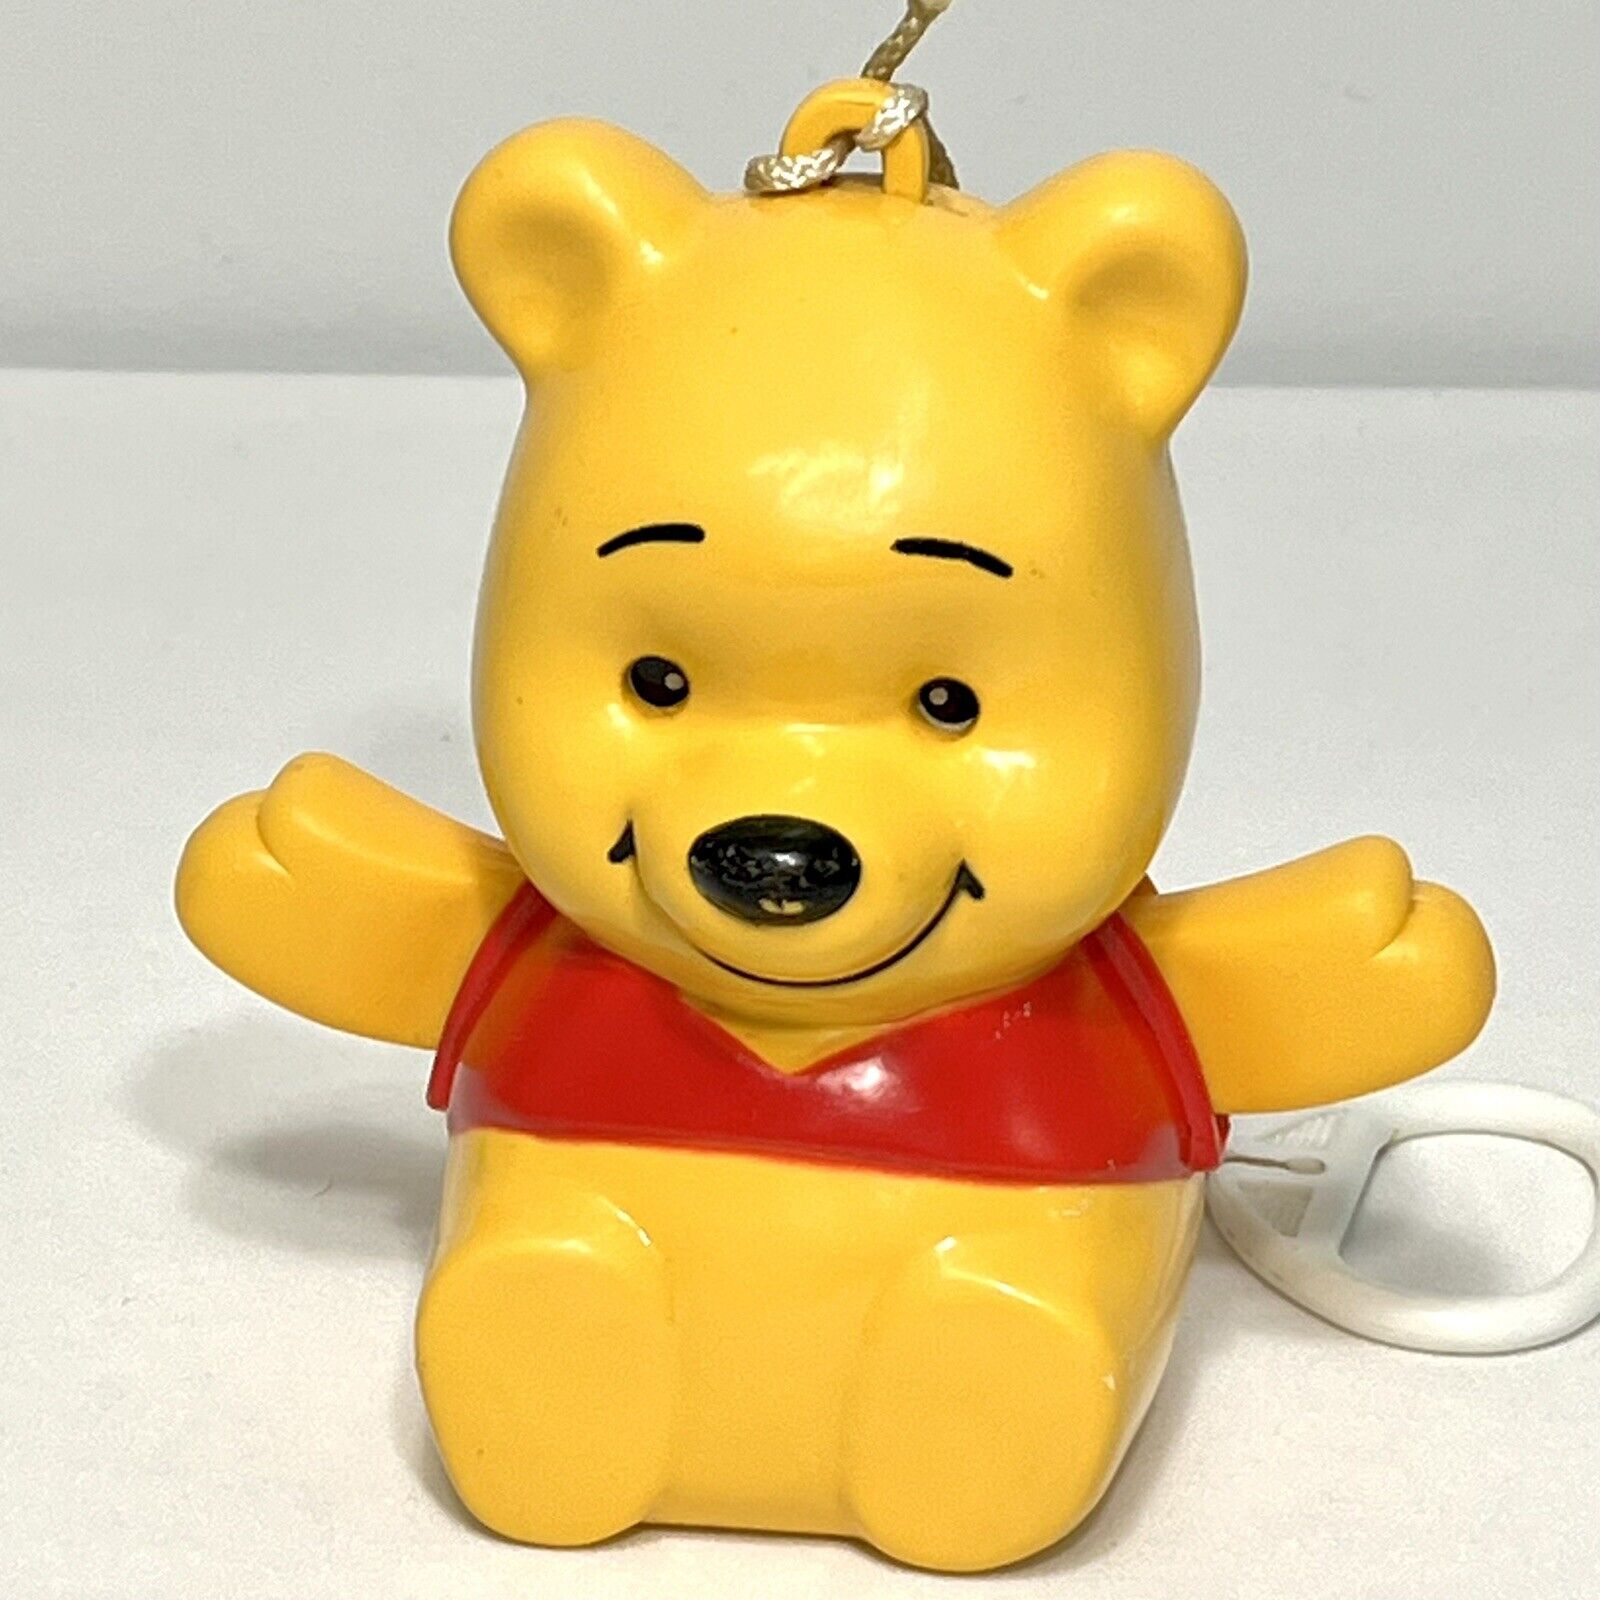 Vintage Winnie the Pooh Musical Crib Pull Toy 1970’s Moving Arms Eyes Works